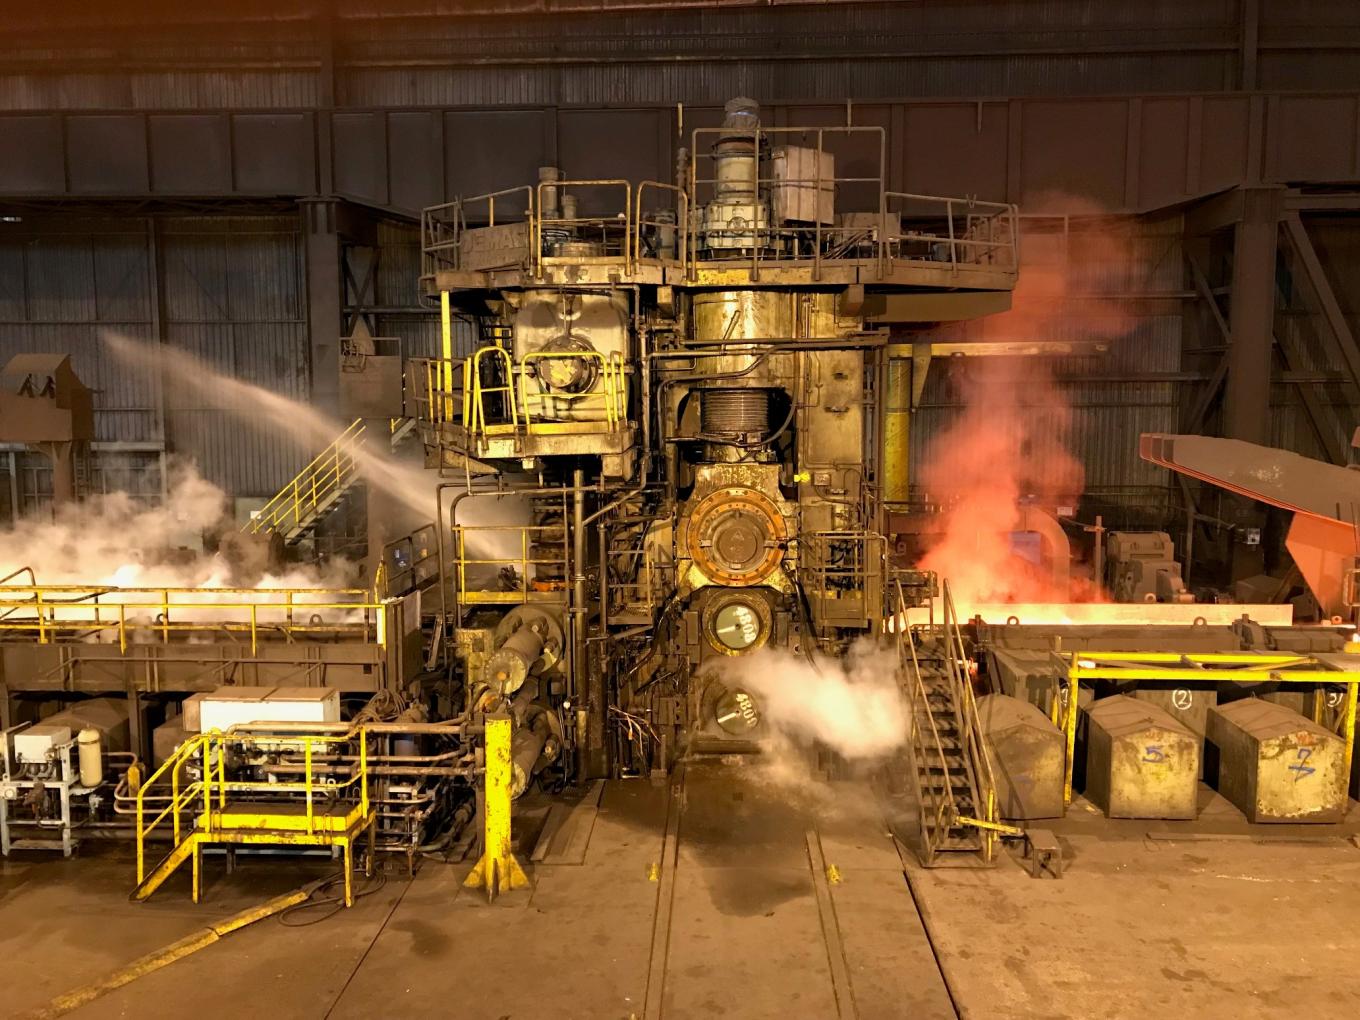 EQUANS_industrie_siderurgie_metallurgie_3